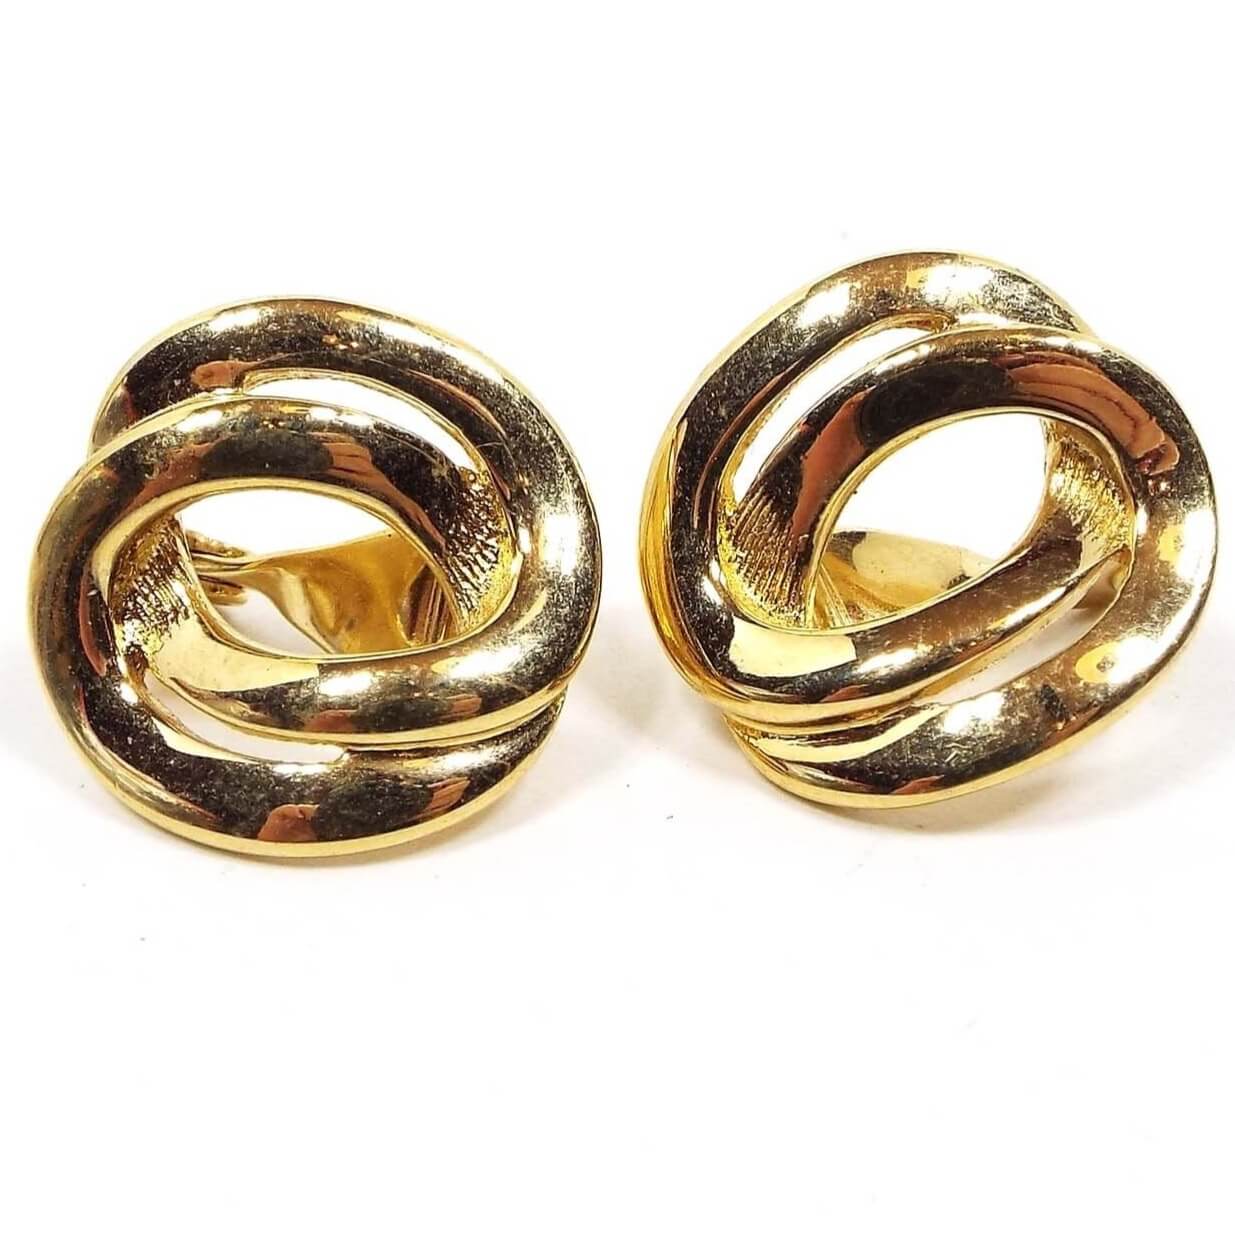 Front view of the Monet retro vintage clip on earrings. The metal is gold tone in color. They are shaped like two intertwined oval links.